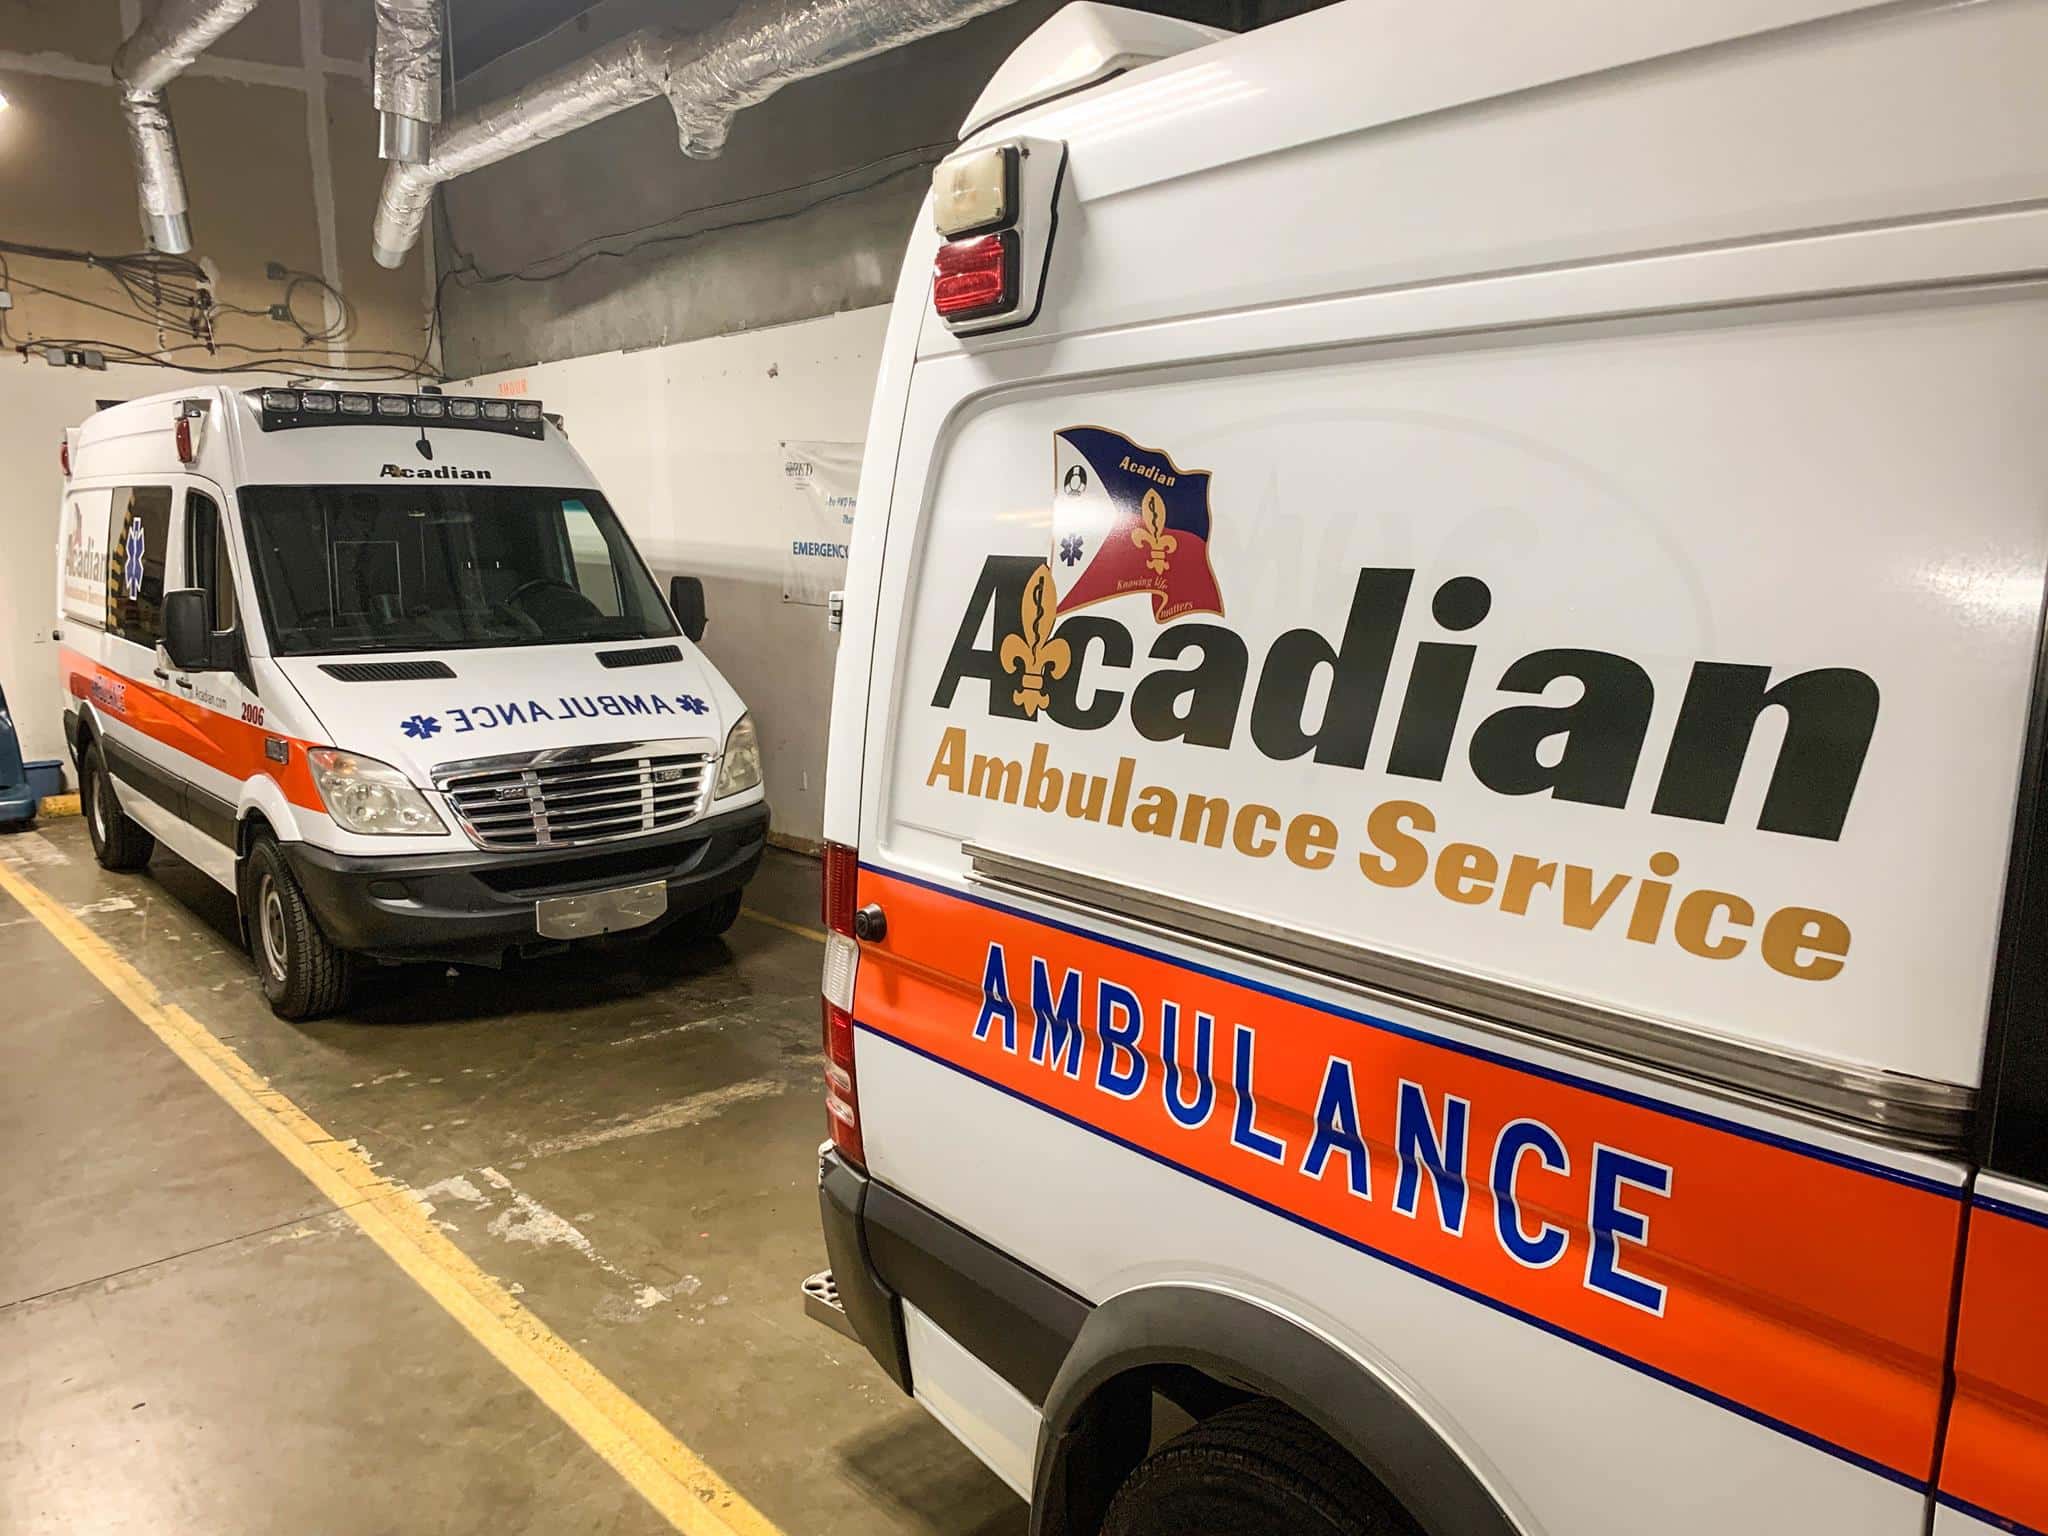 Acadian Ambulance in Tennessee